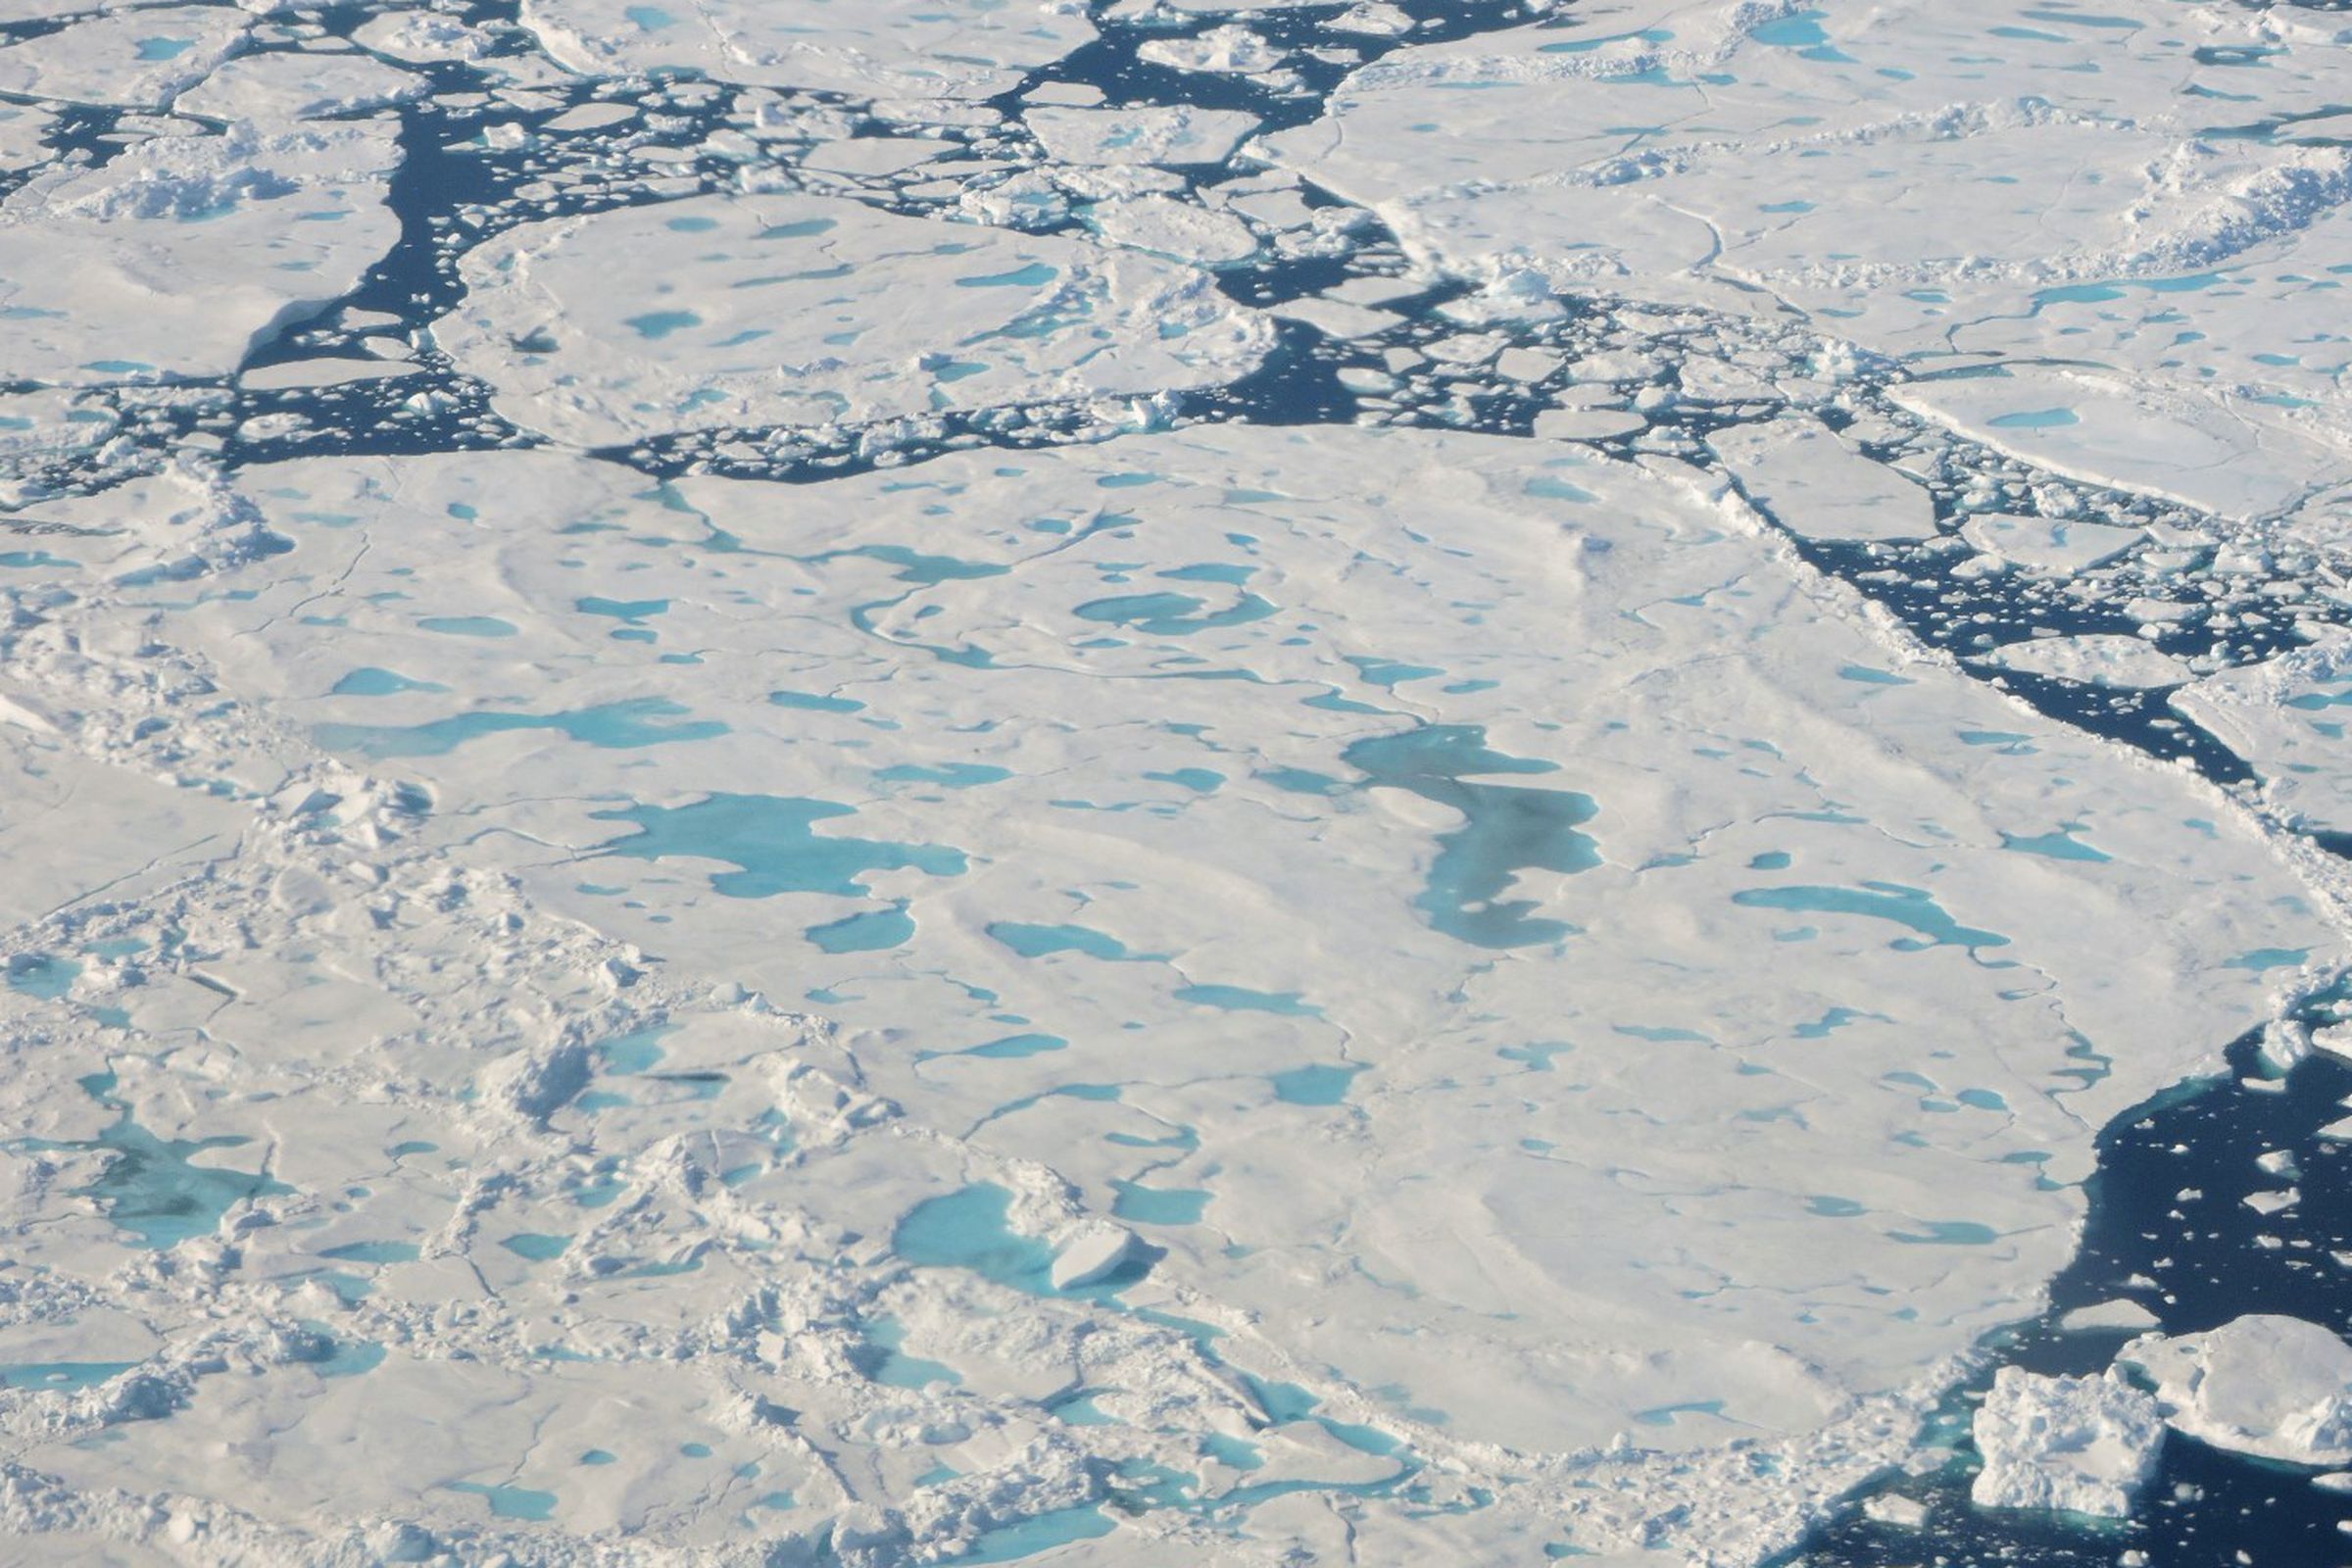 Sea ice floating north of Greenland.